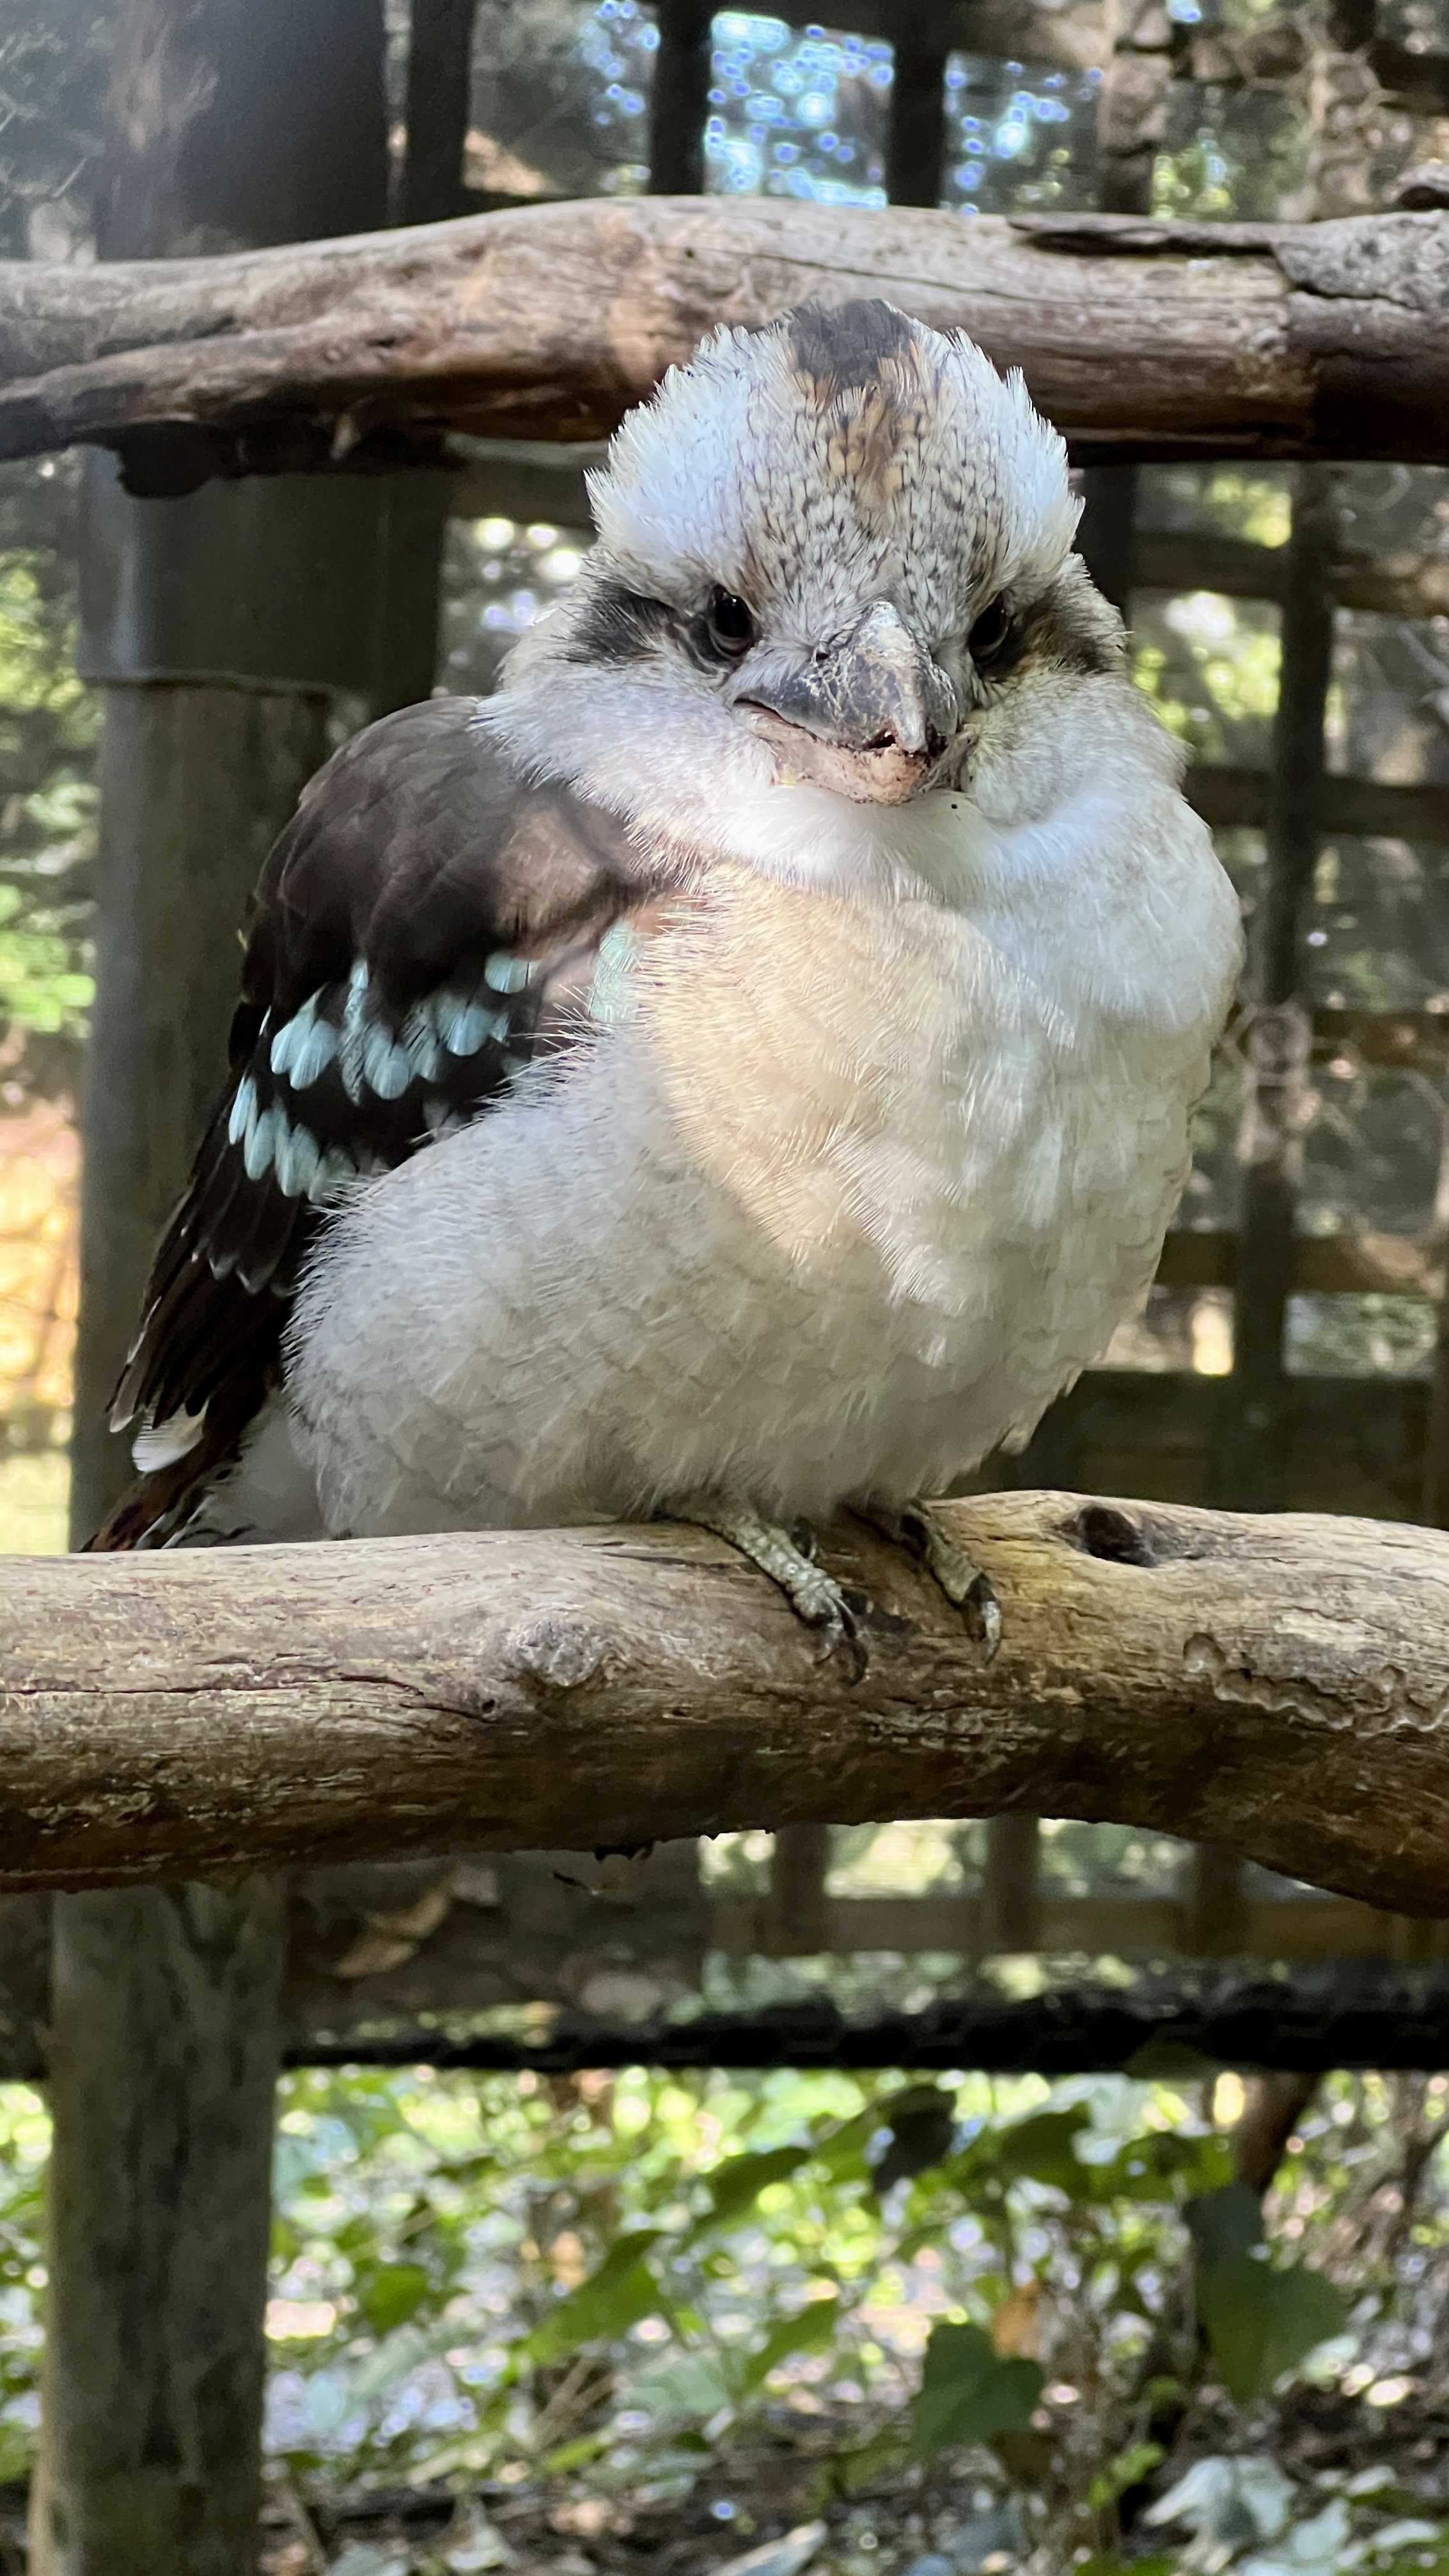 Kookaburra is all fluffed up. It's a chilly morning.